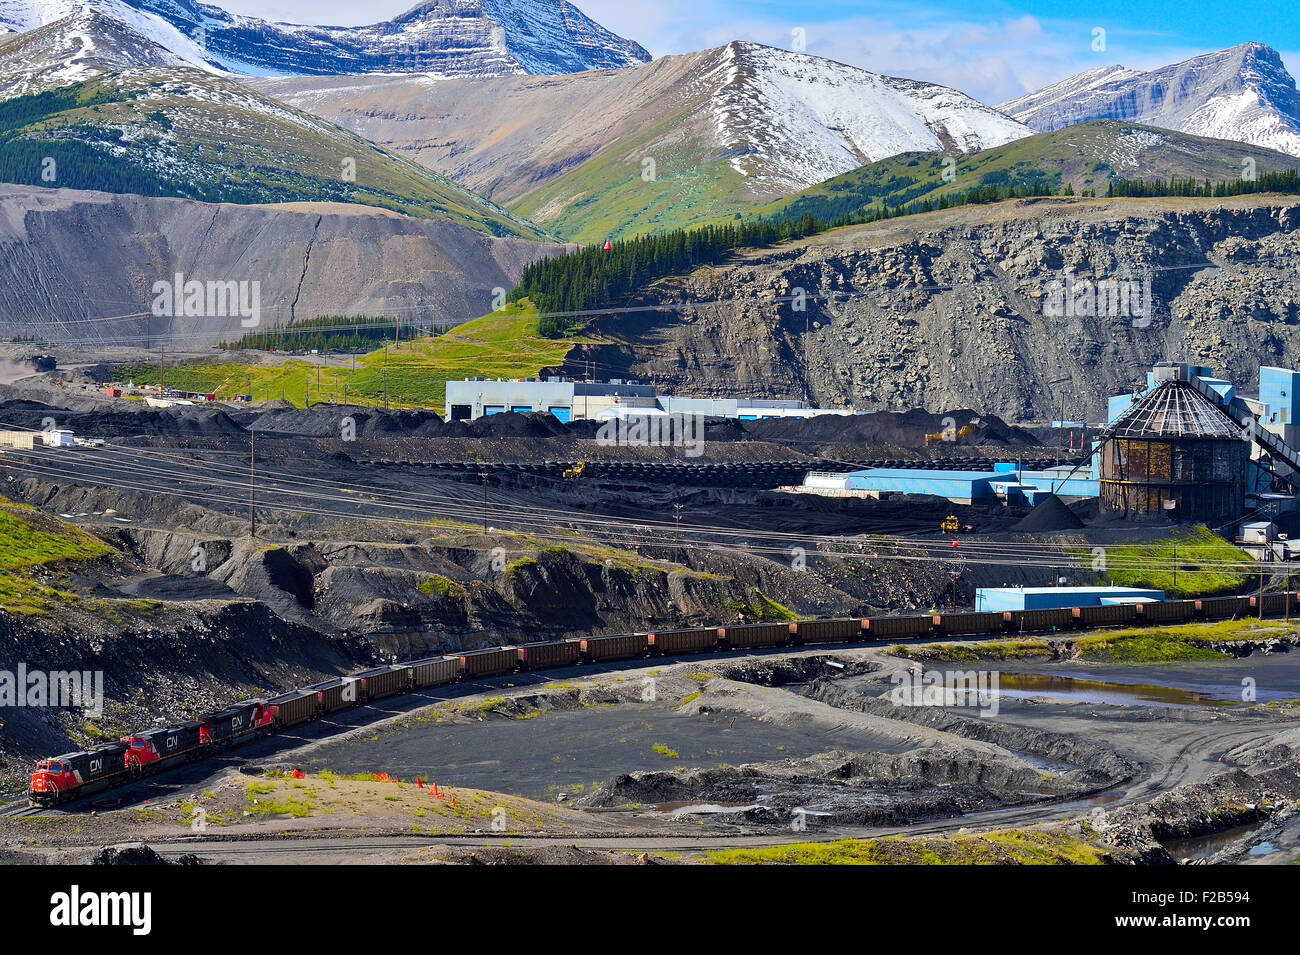 A horizontal landscape image of the Teck coal processing plant in the foothills of the rocky mountains near Cadomin Alberta Stock Photo